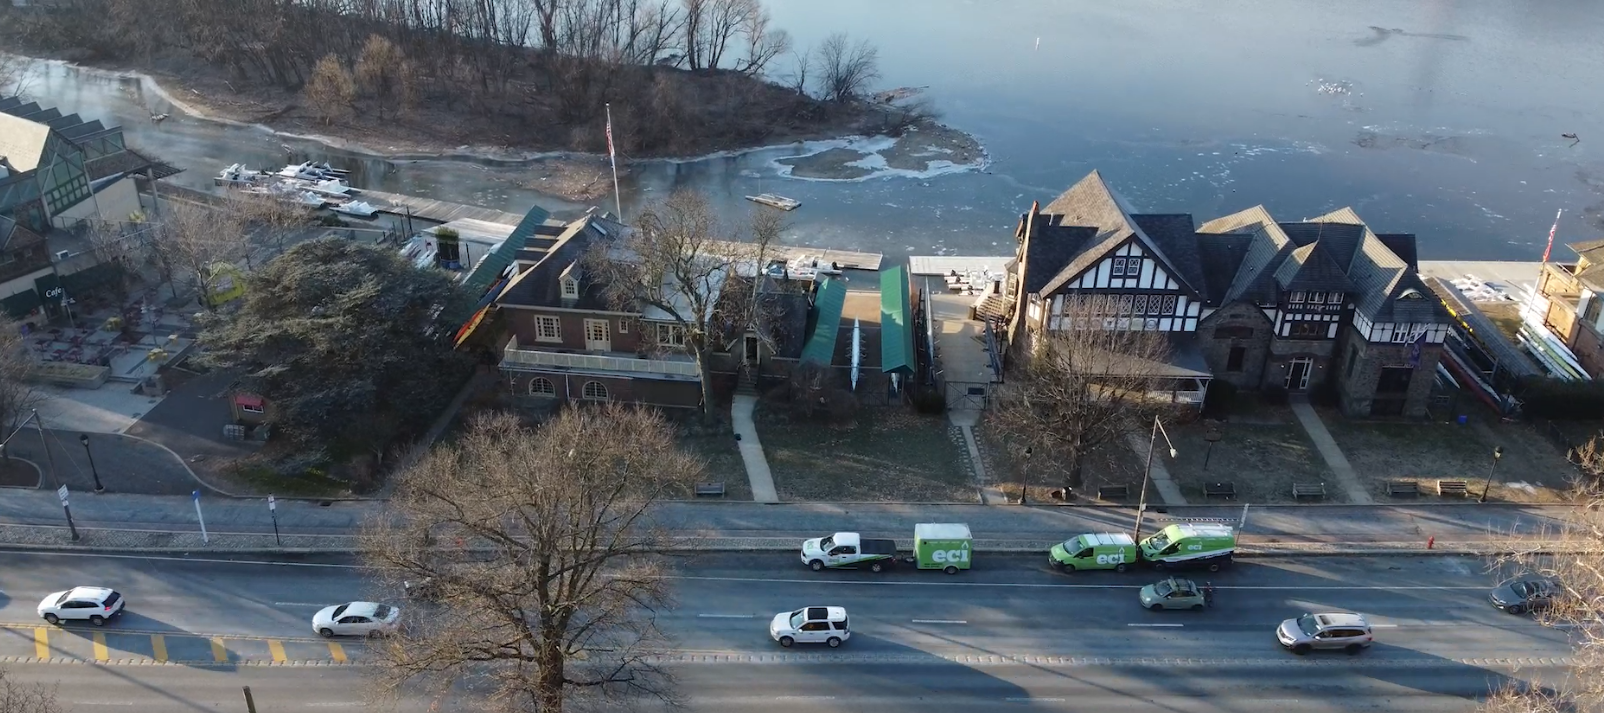 Mitsubishi Ductless AC Replacement in Boathouse Row, Philadelphia Following Flood Damage